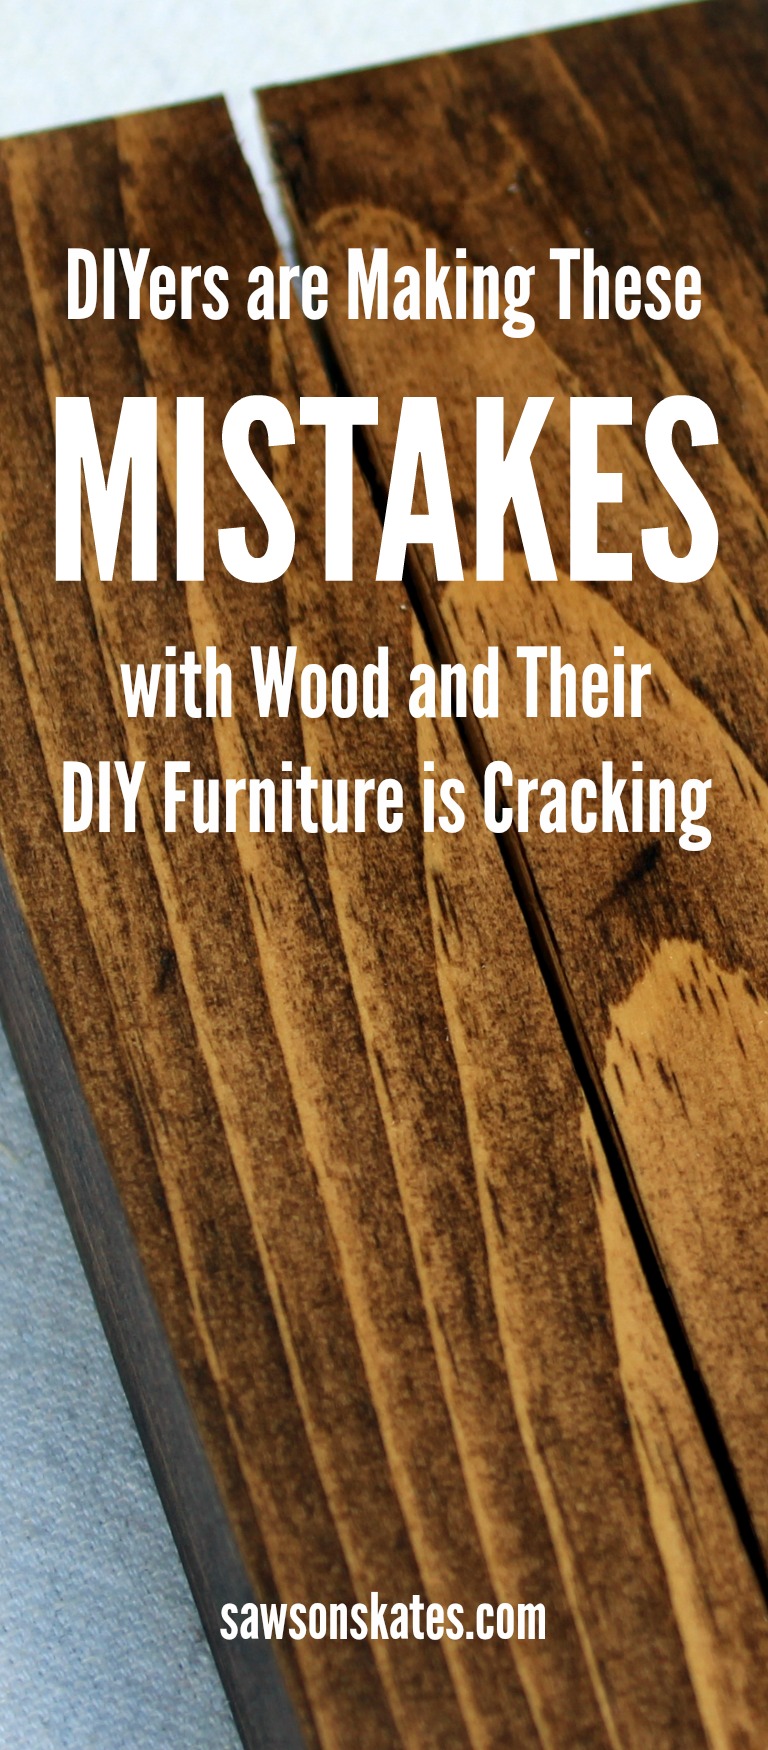 Do you have a DIY furniture project that is cracking? From coffee tables to cutting boards, seasonal changes can cause wood to crack. I'm sharing building tips about how to prevent your wood furniture from cracking.